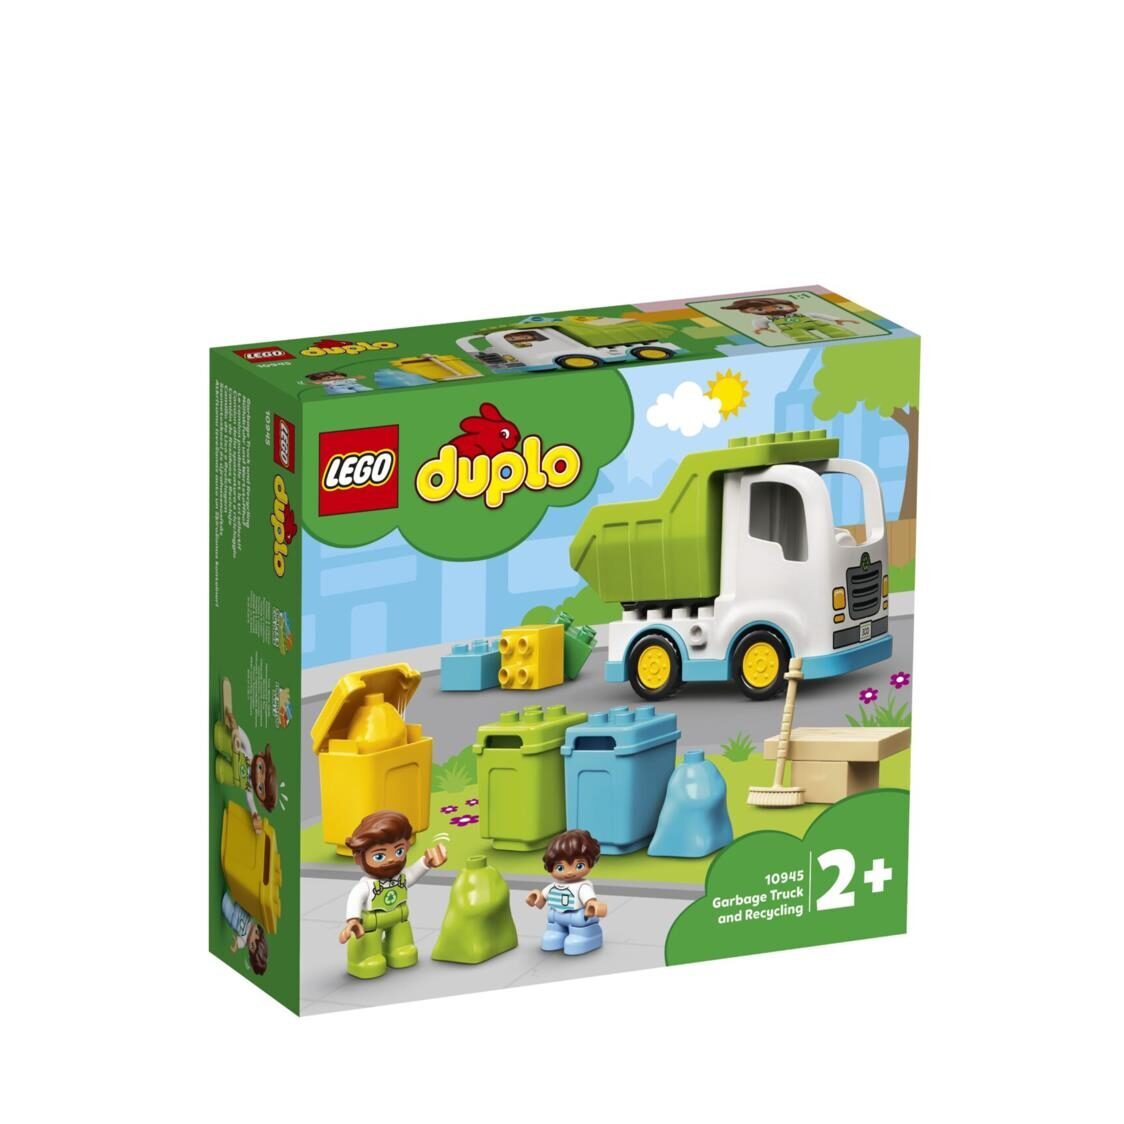 LEGO DUPLO Town - Garbage Truck and Recycling 10945